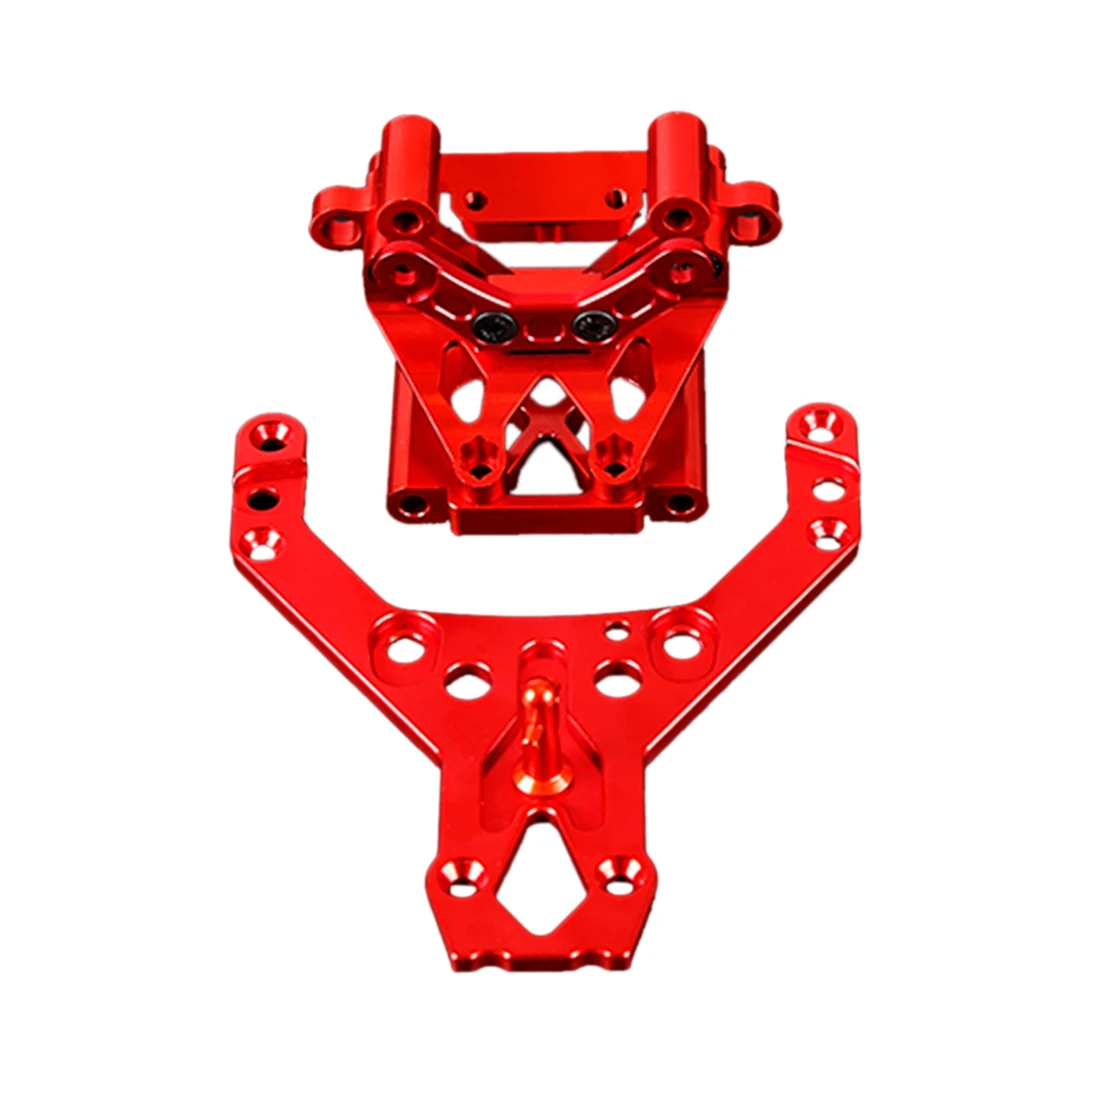 

CNC Metal Front Towers Bulkhead Supports Kit for HPI Rovan King Motor Baja 5B Buggy Rc Car Toys PARTS Red